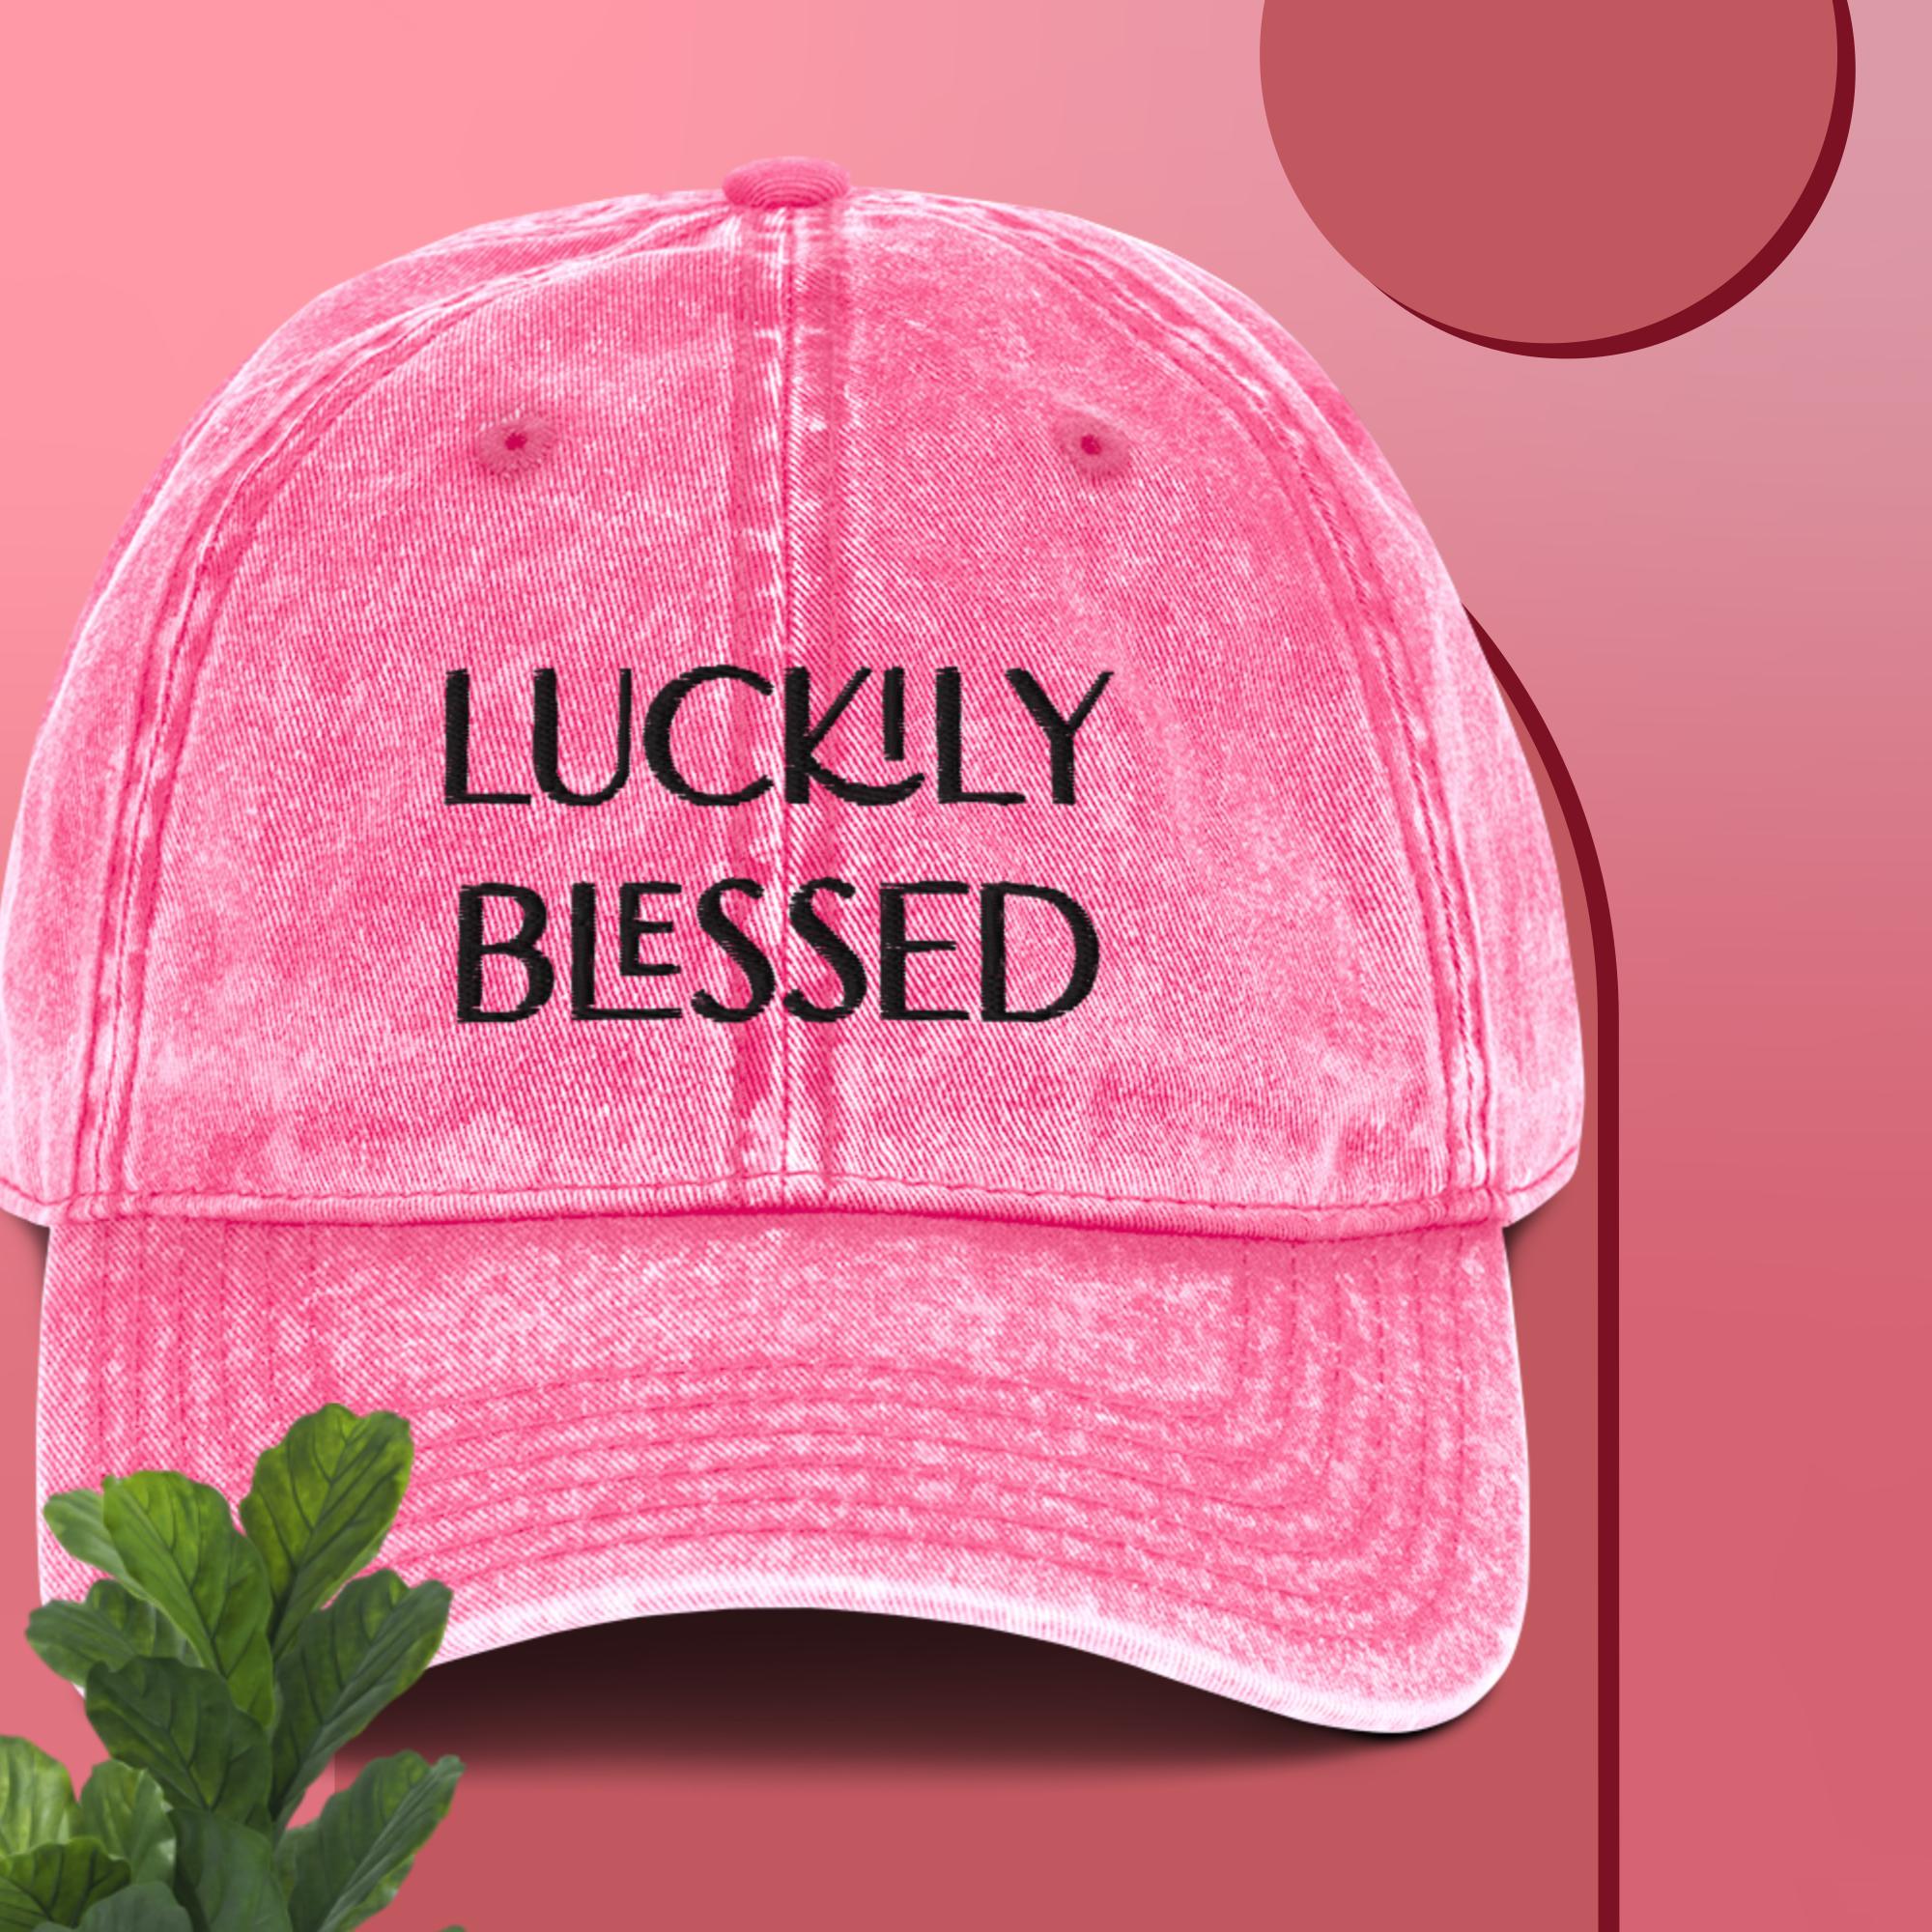 Luckily Blessed Vintage Cotton Twill Cap